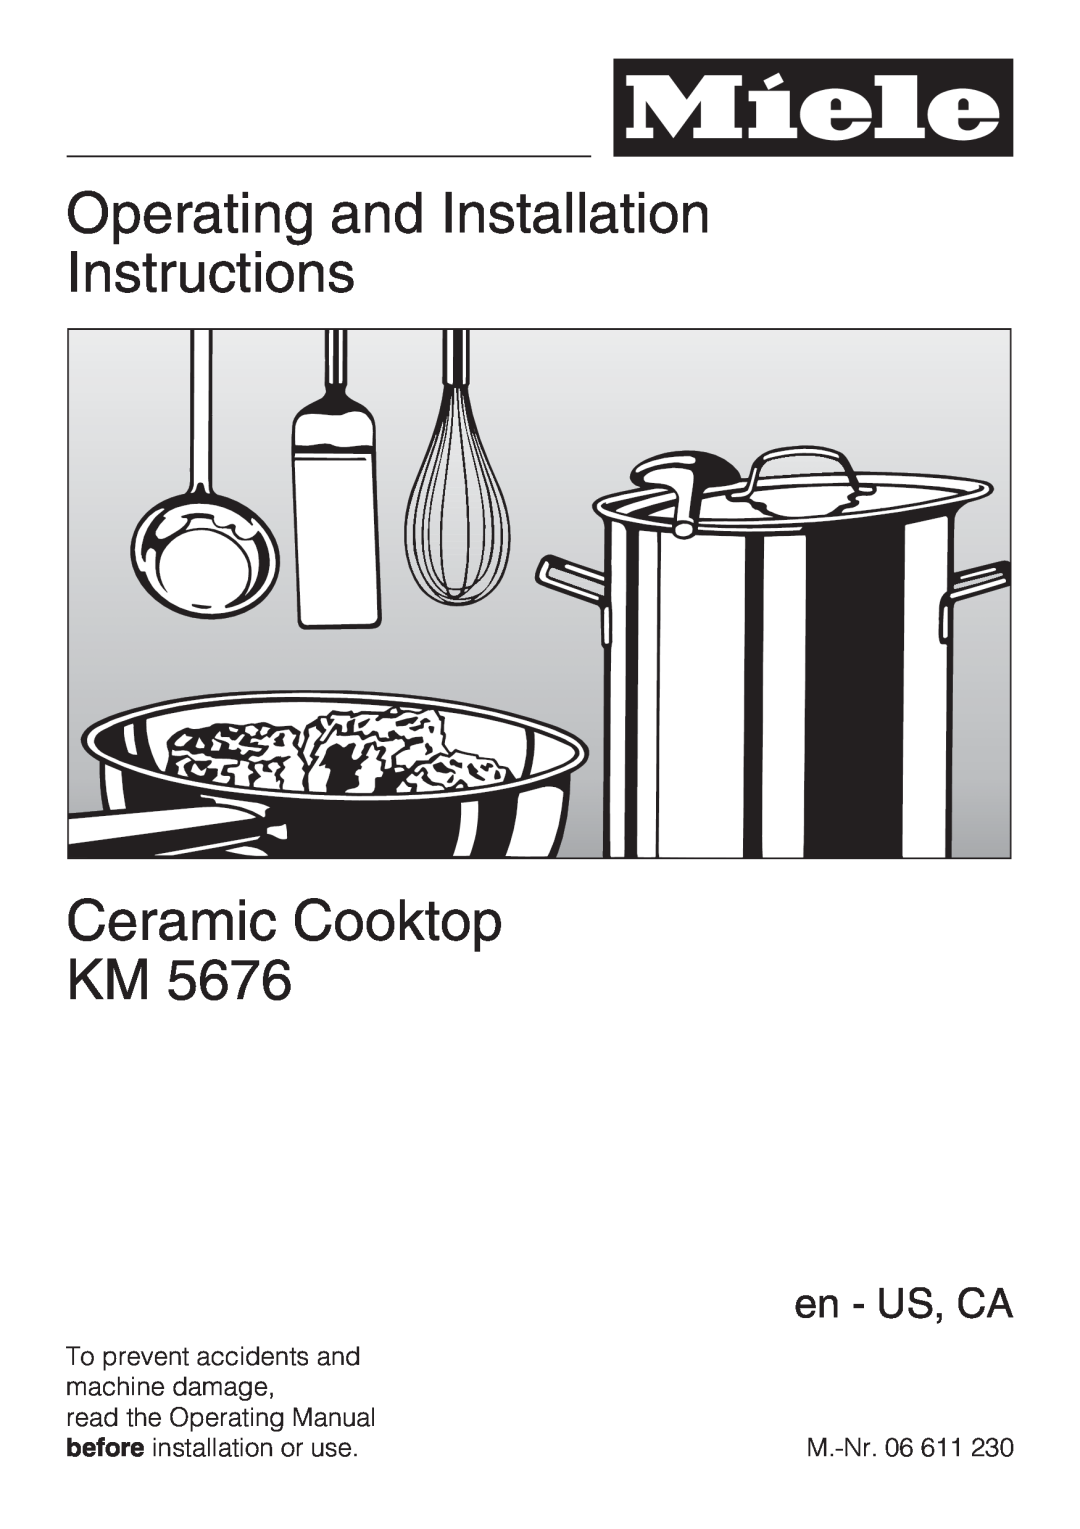 Miele KM5676 installation instructions Operating and Installation Instructions, Ceramic Cooktop KM, en - US, CA 